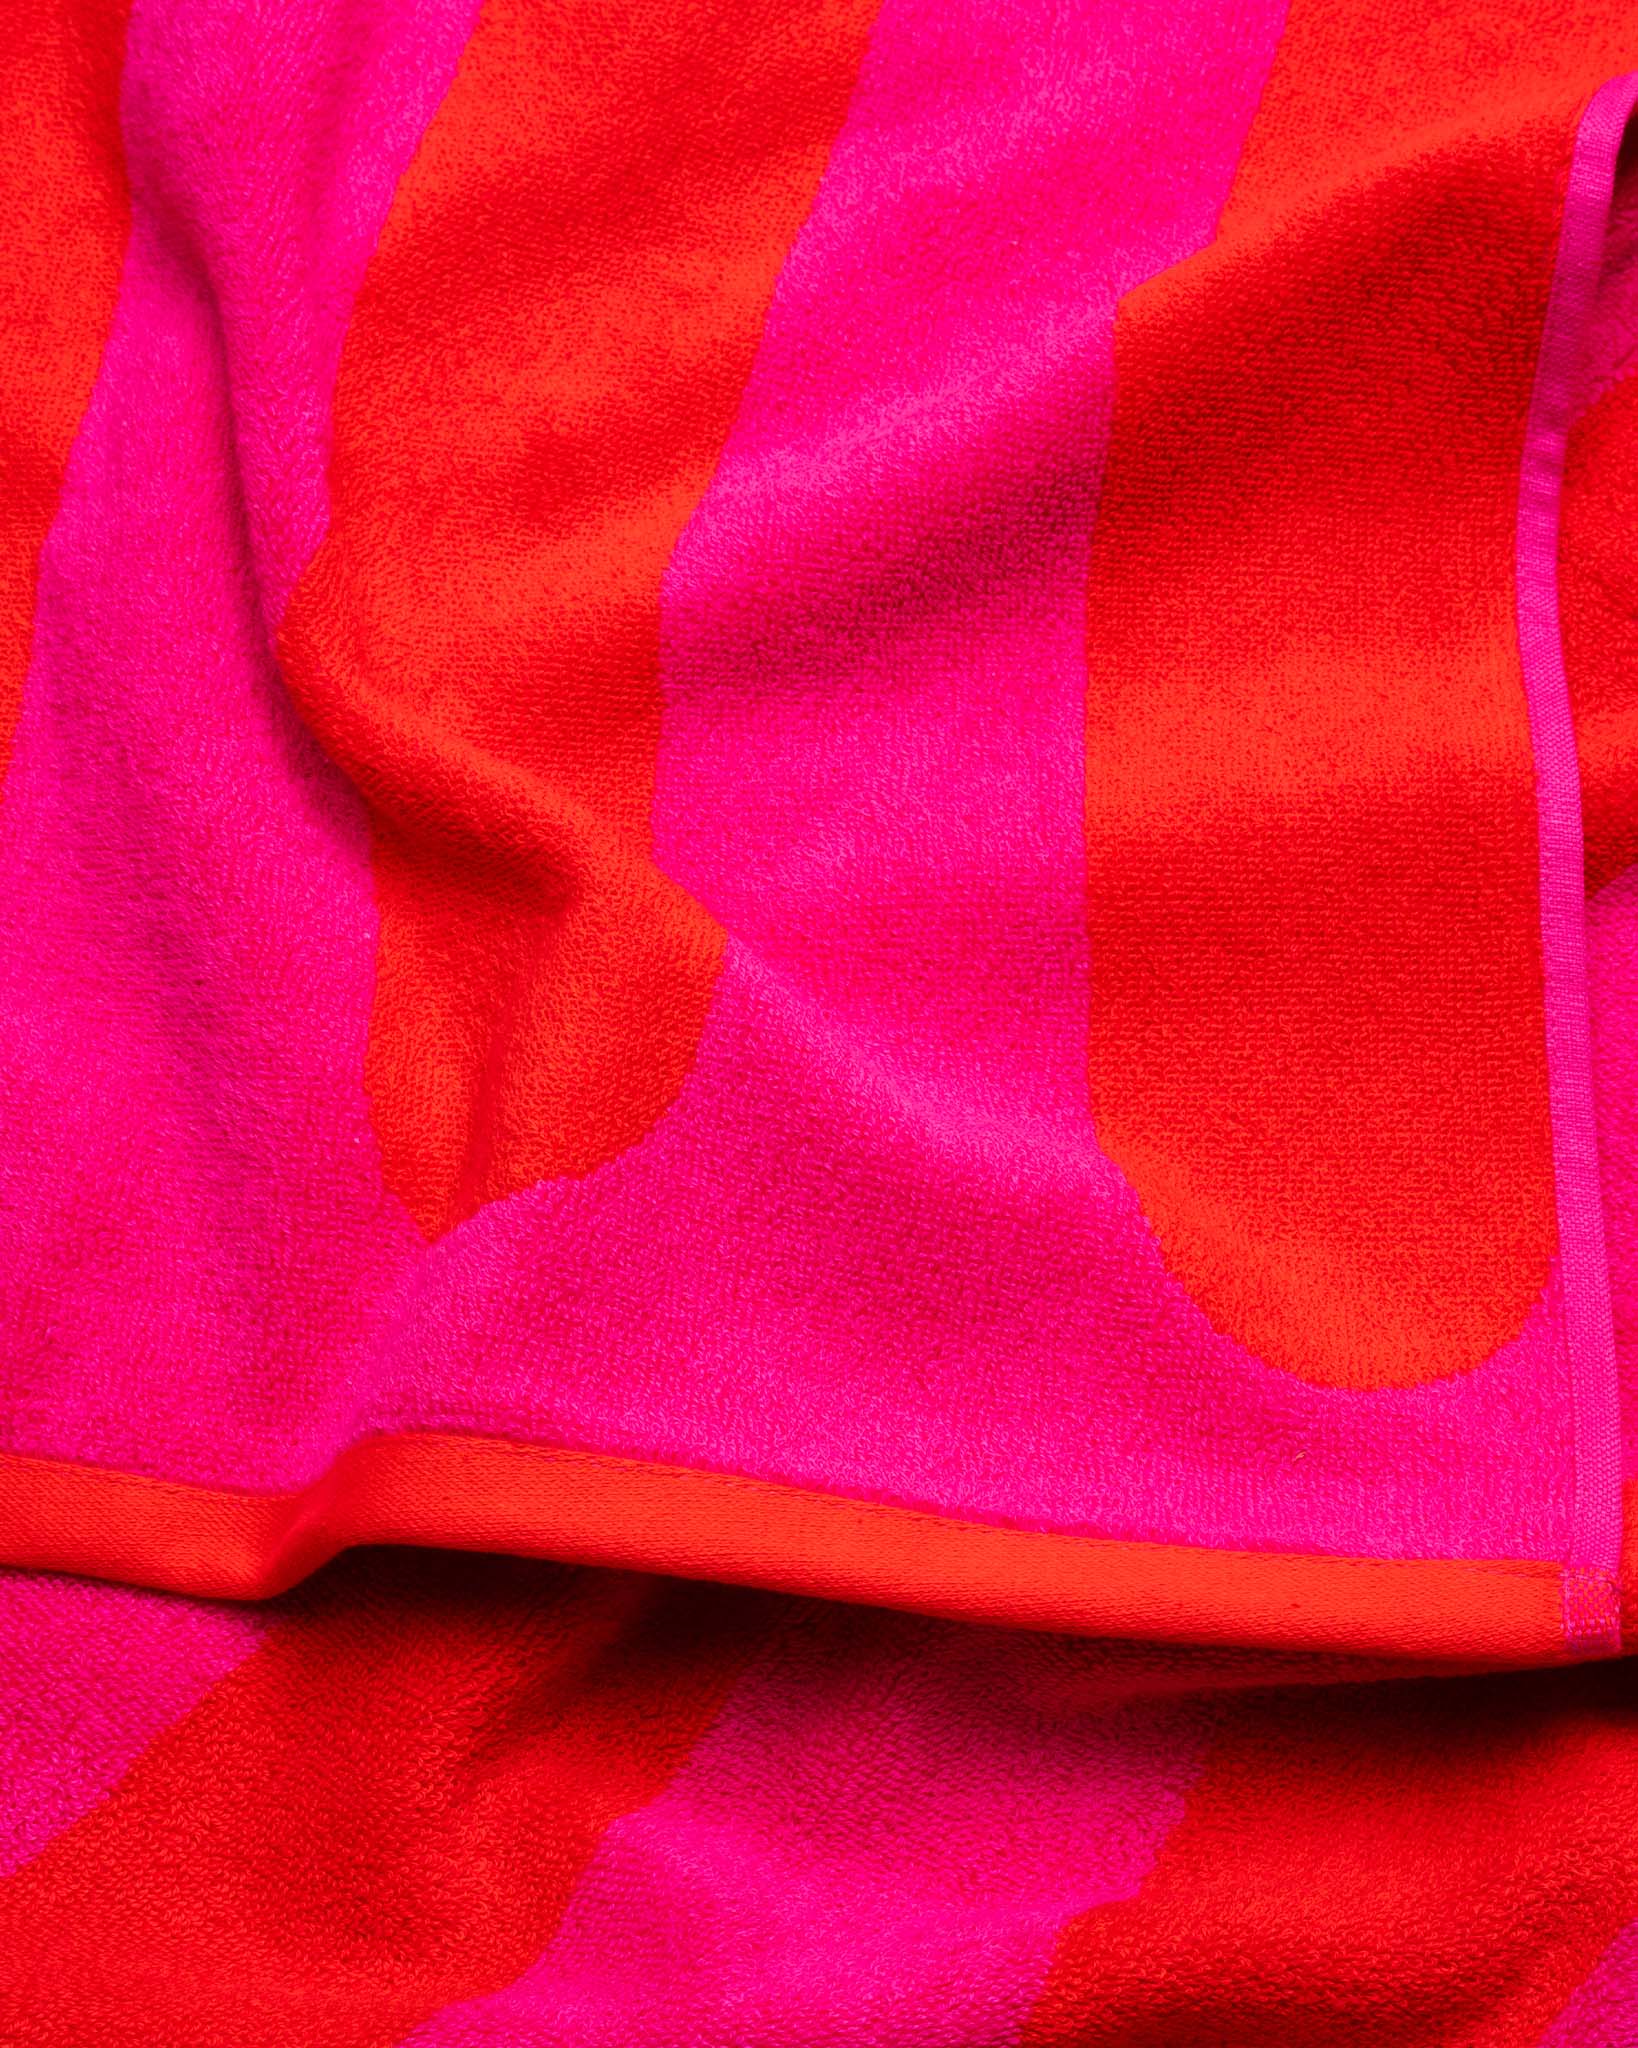 A folded red and magenta striped towel. 